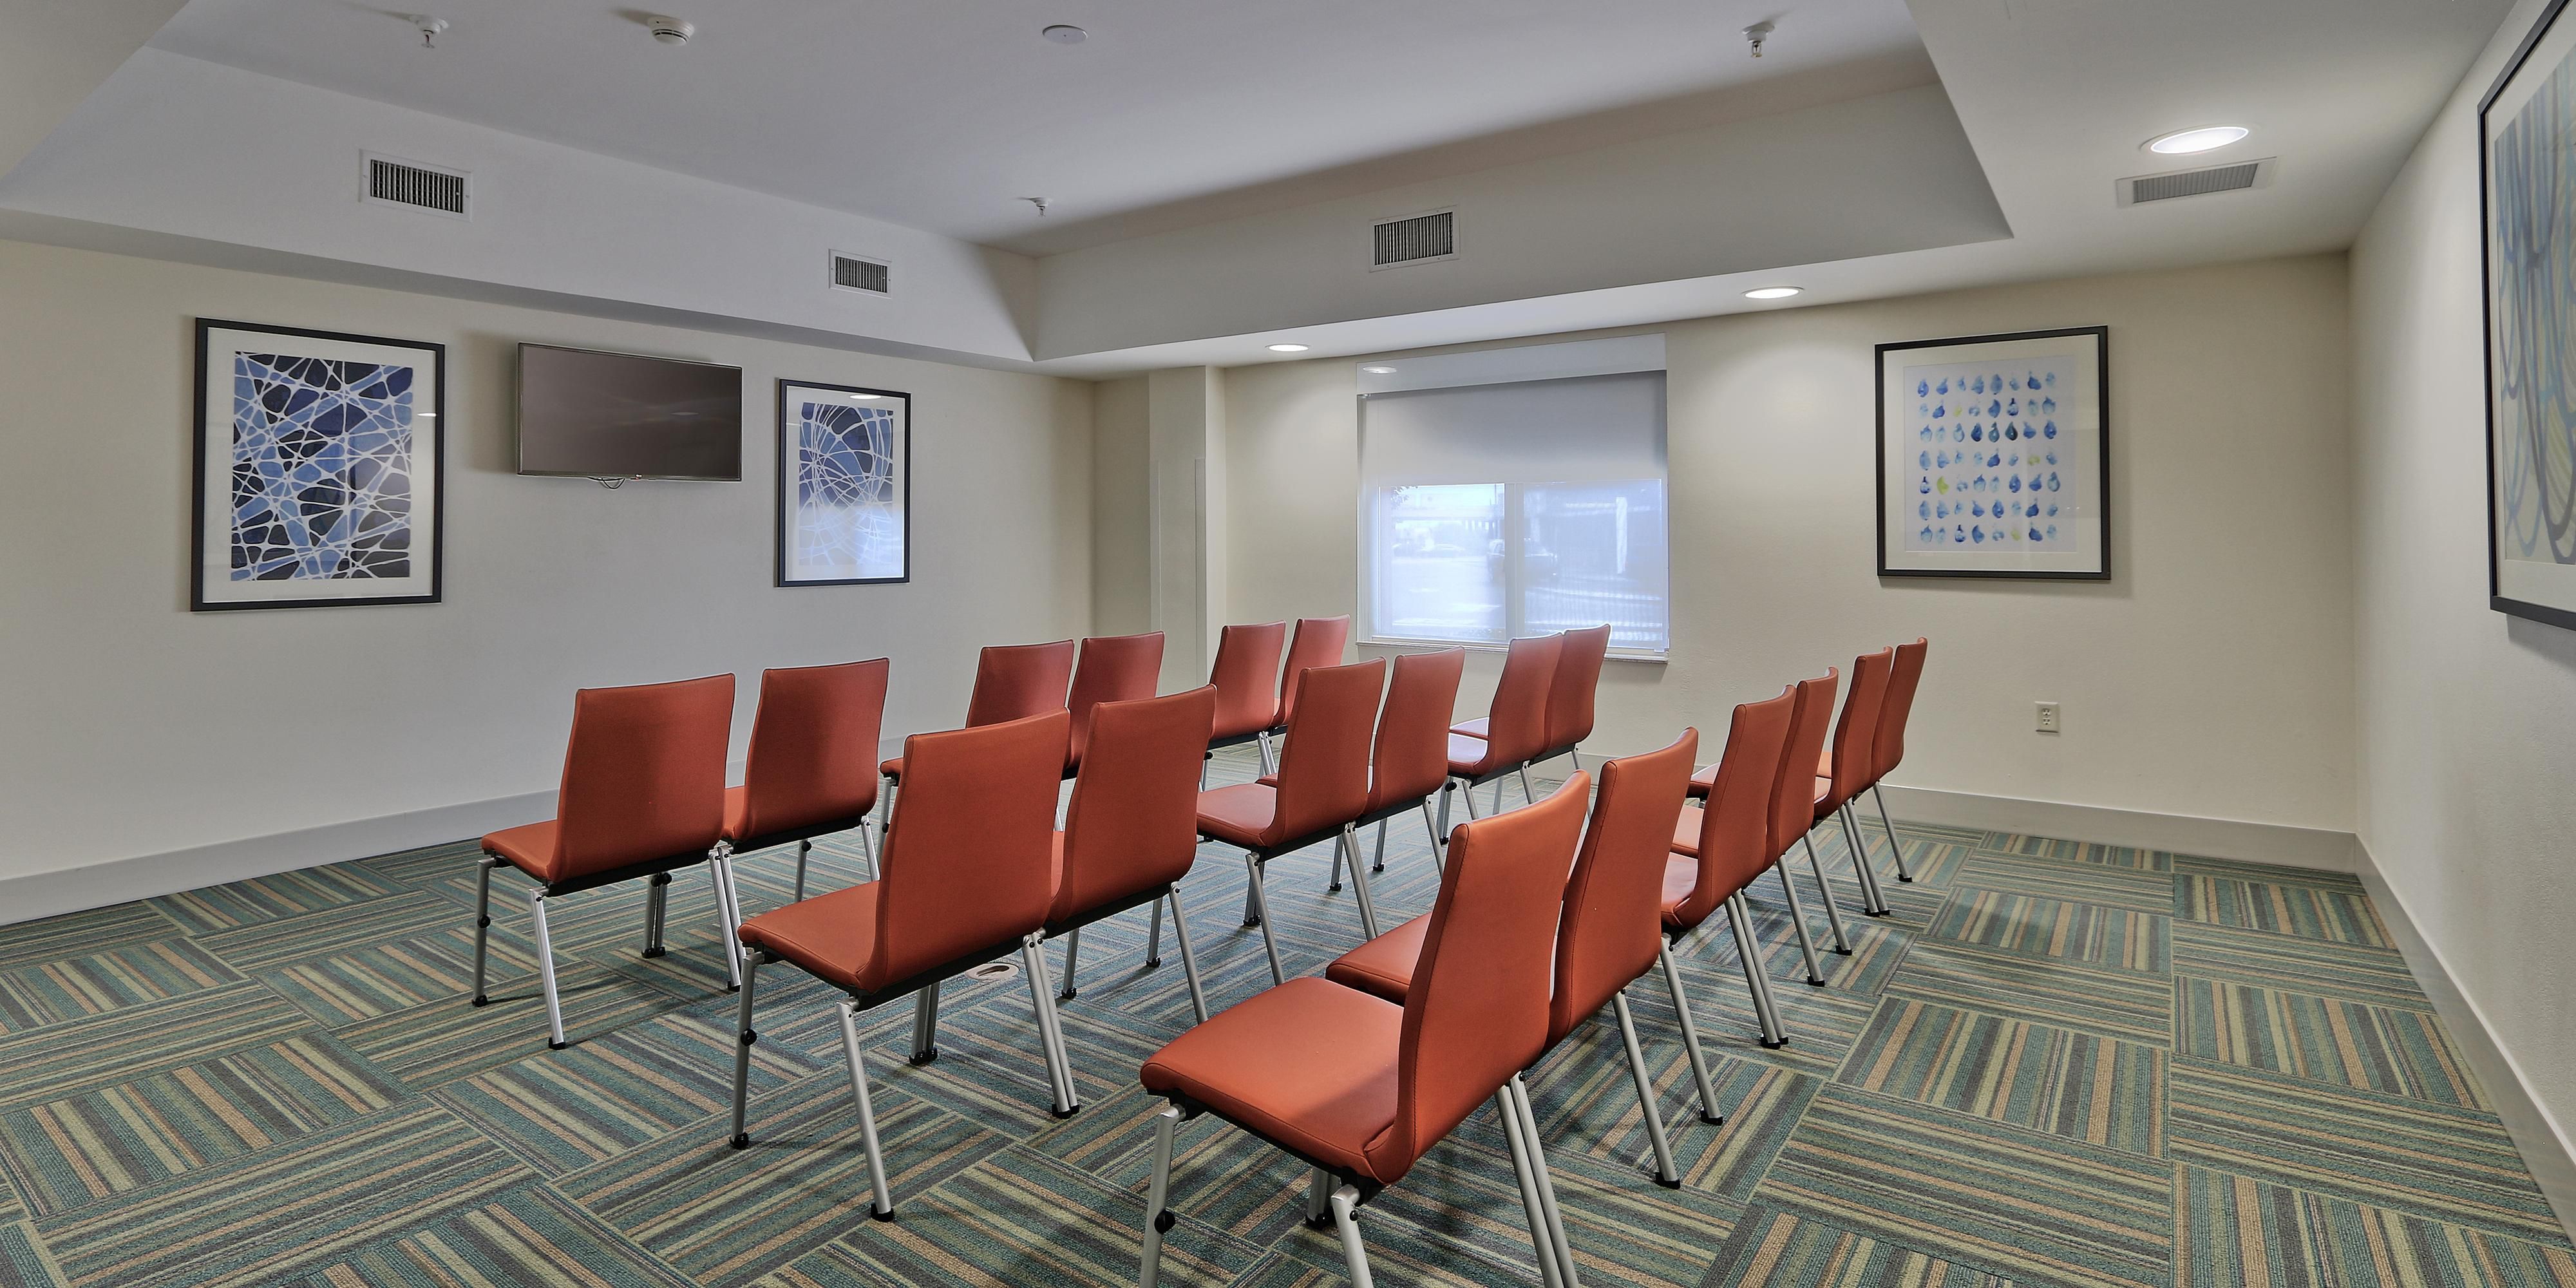 Hosting a small gathering or corporate meeting? We've got you covered with our 2 meeting rooms, each 360 SQ FT featuring natural daylight.